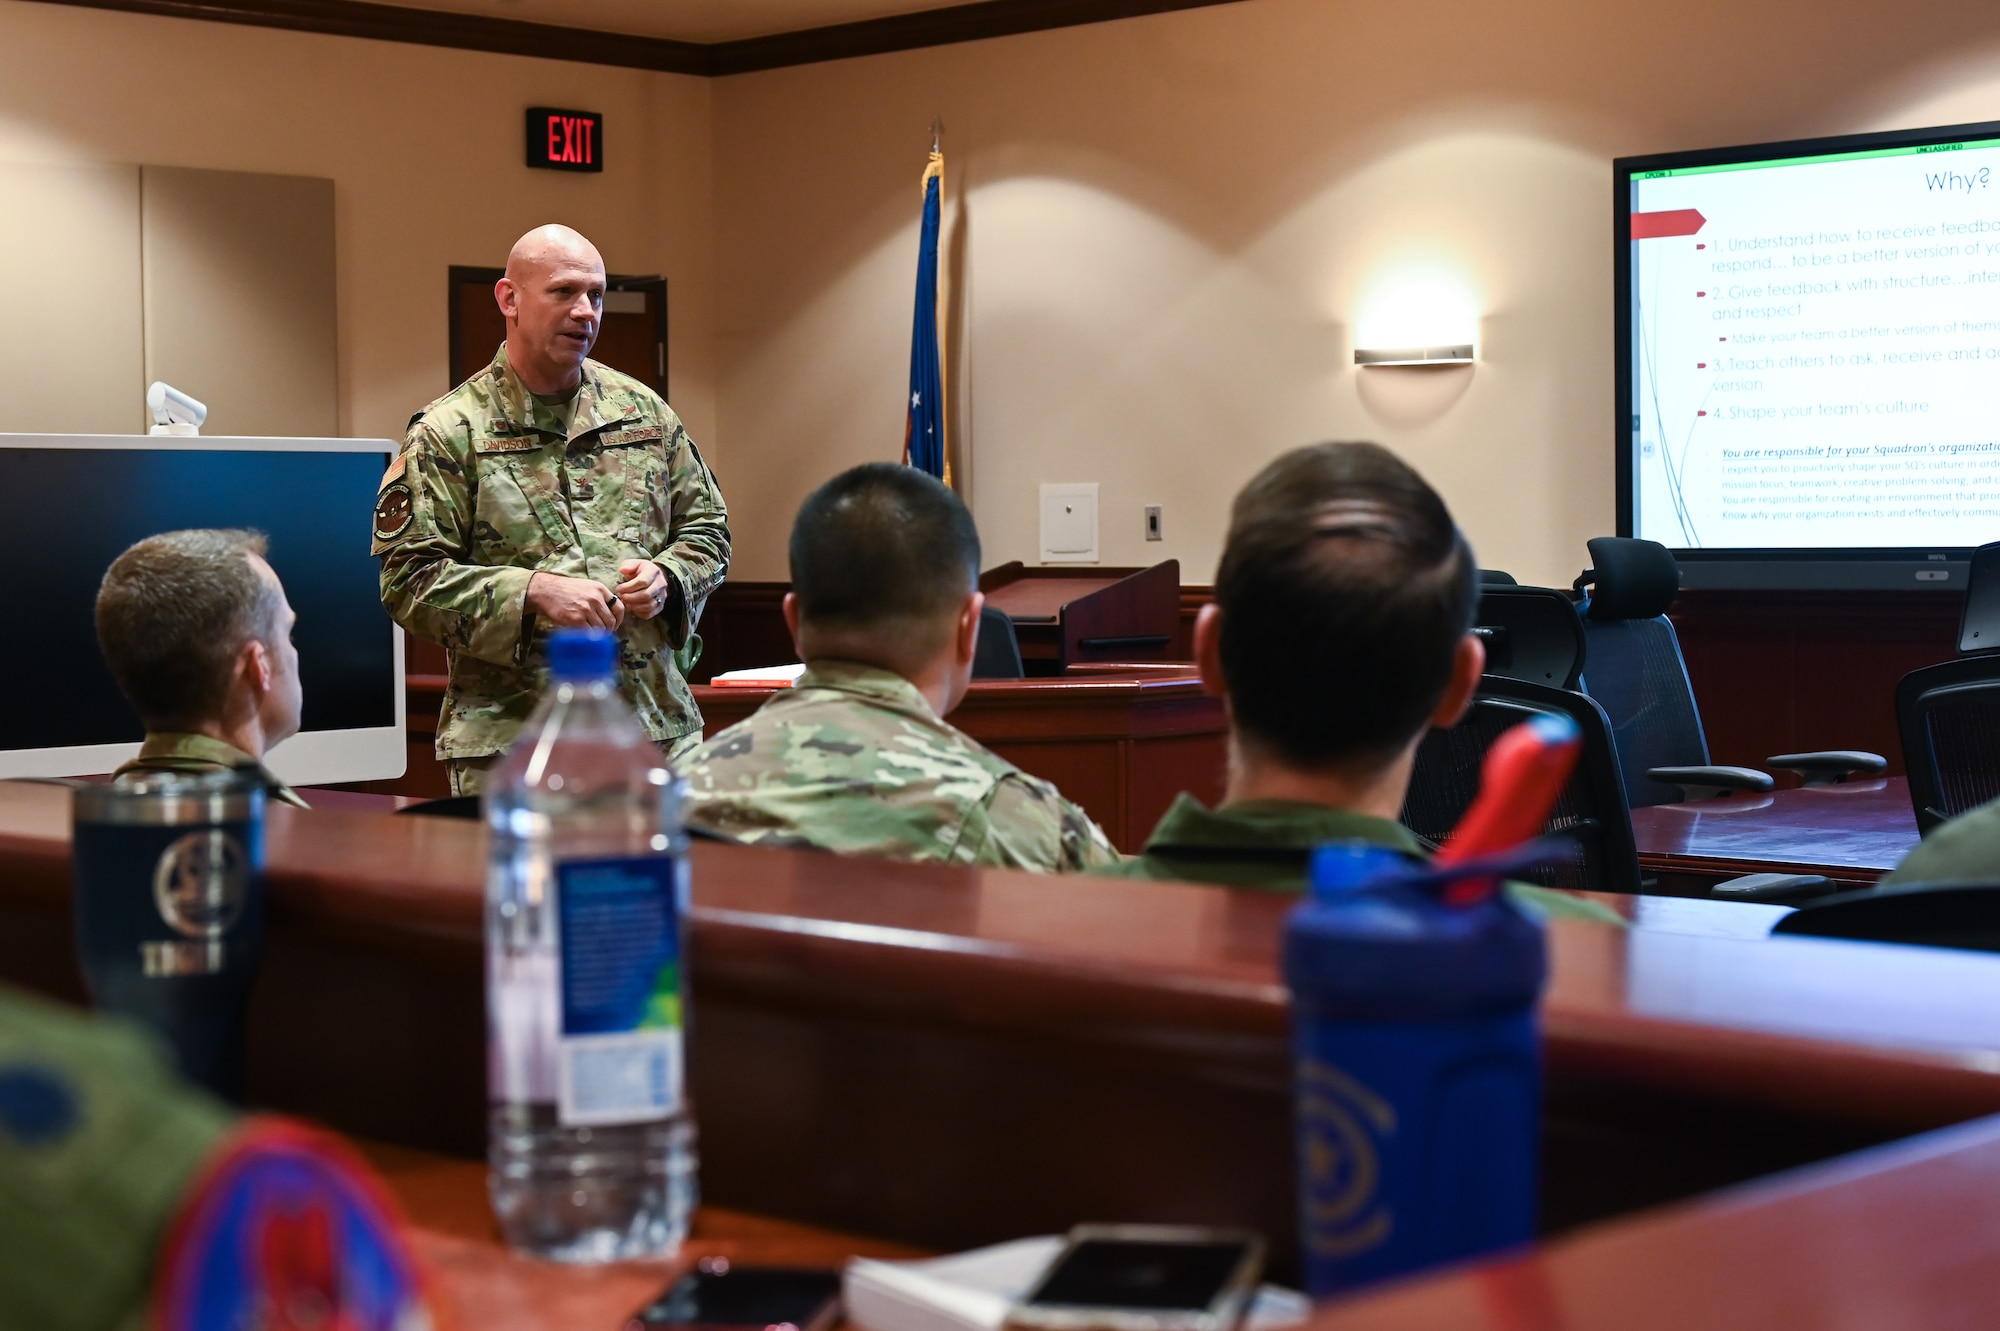 U.S. Air Force Col. Davidson, 47th Flying Training Wing commander, leads a professional development discussion at Laughlin Air Force Base, Texas, on March 22, 2023. Col. Davidson emphasized the importance of creating a continuous learning and development culture where feedback is embraced as a valuable tool for growth and improvement. (U.S. Air Force photo by Airman 1st Class Keira Rossman)